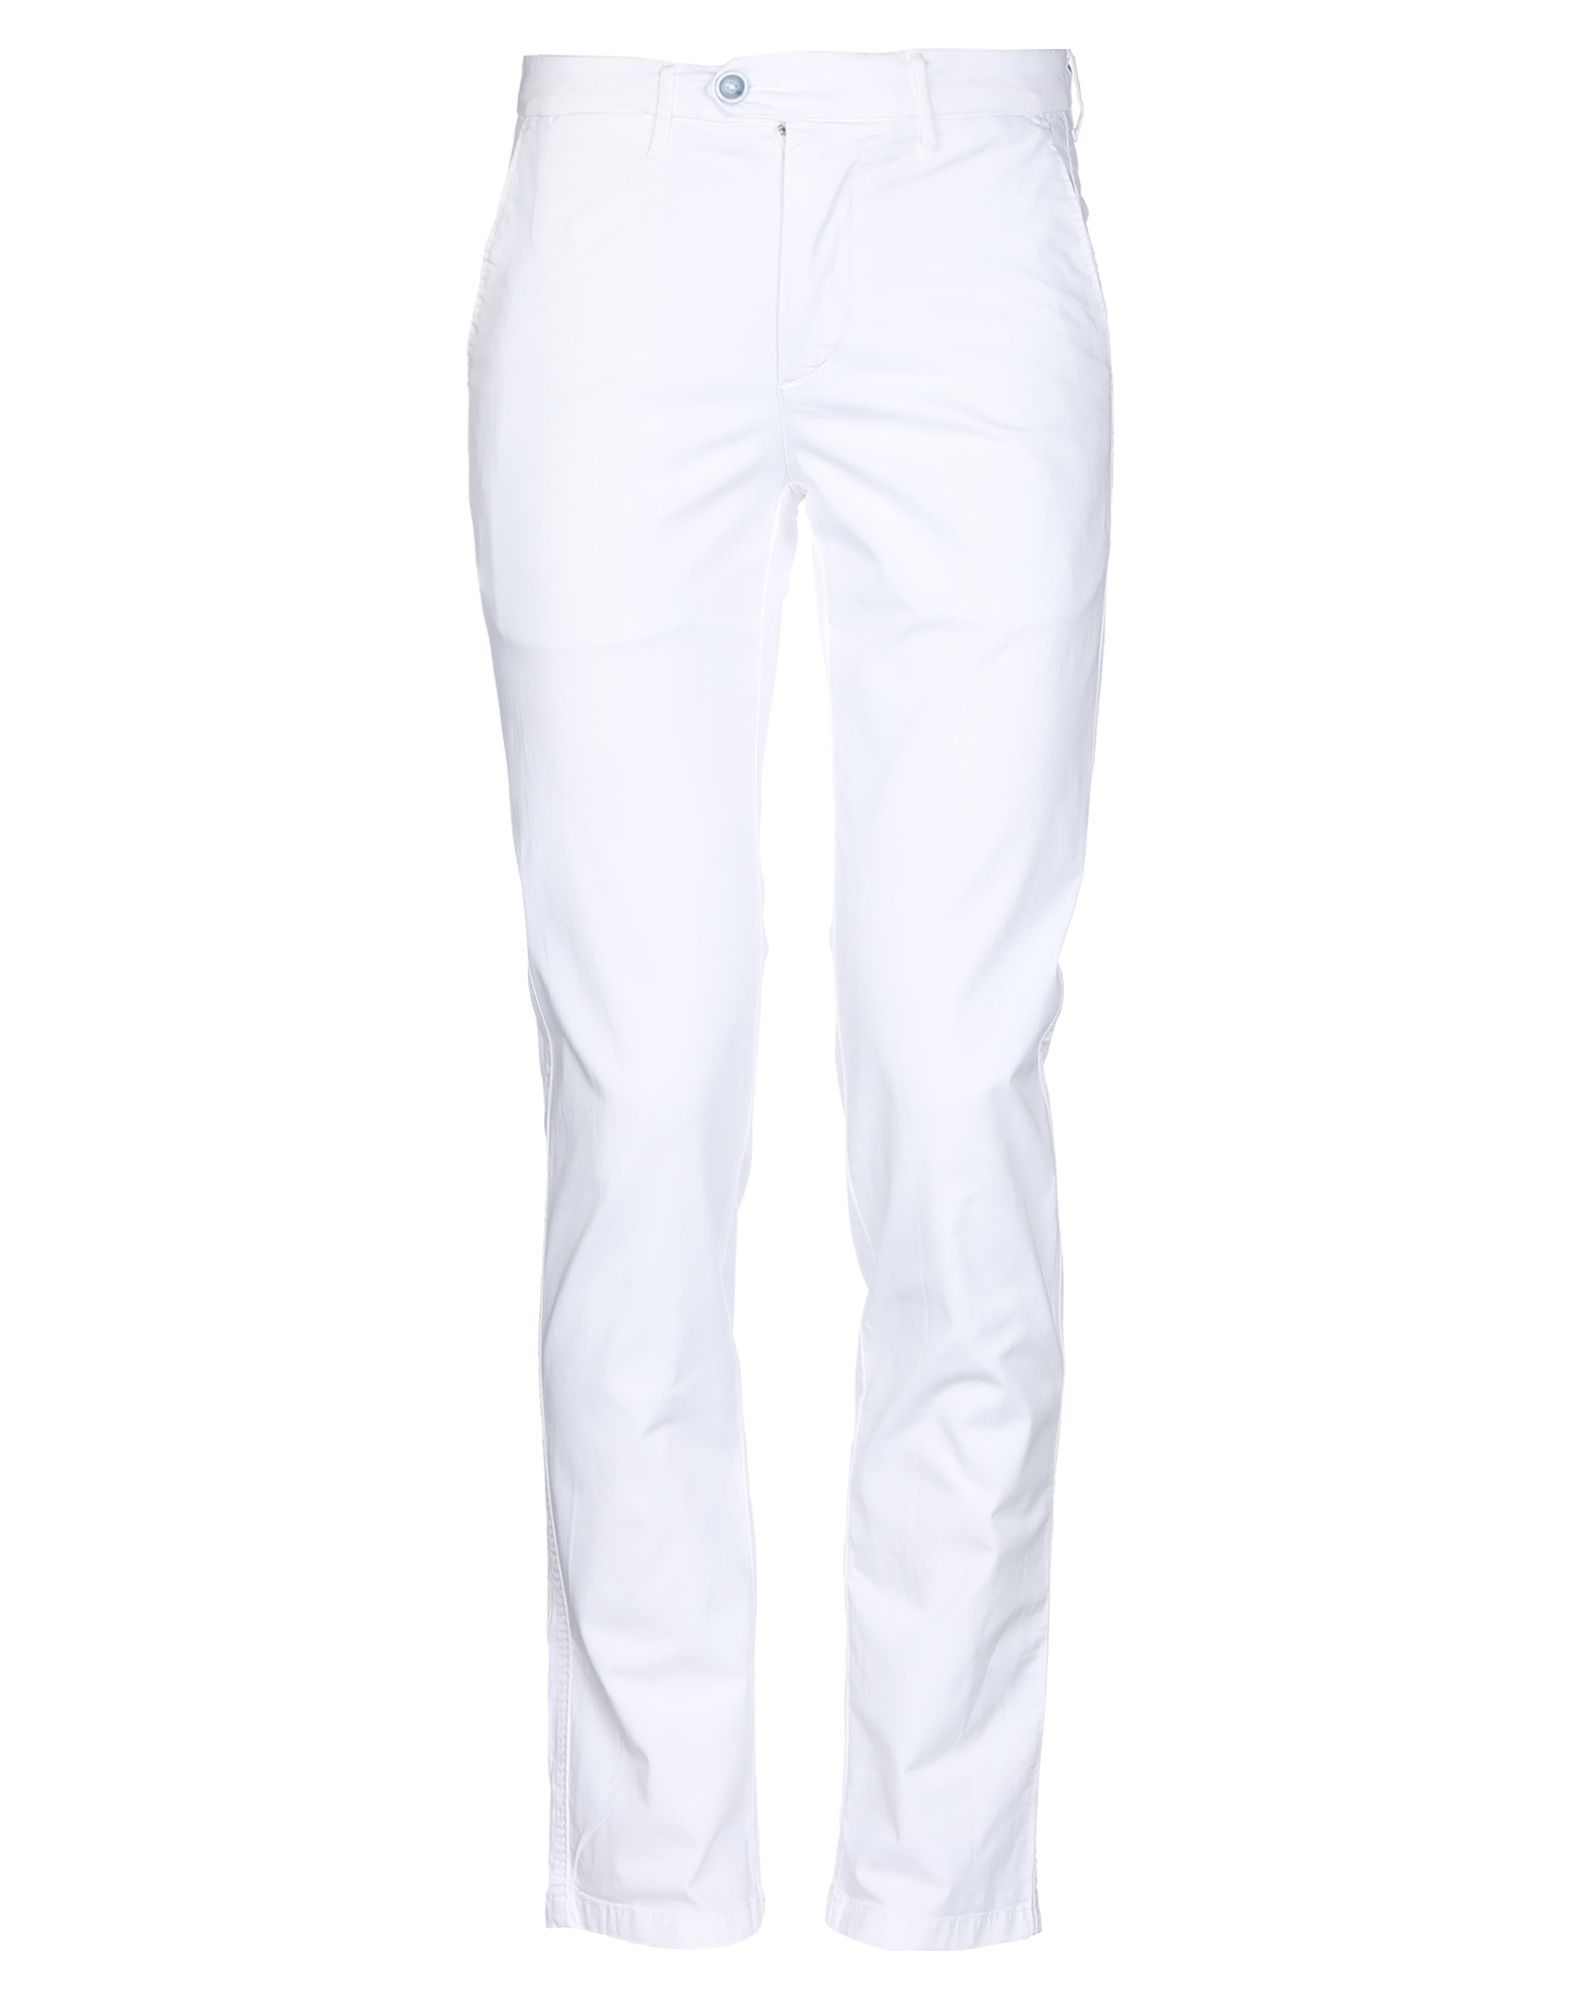 Plain weave<br>No appliqués<br>Basic solid colour<br>Mid Rise<br>Slim fit<br>Tapered leg<br>Button closing<br>Multipockets<br>Stretch<br>Chinos<br>